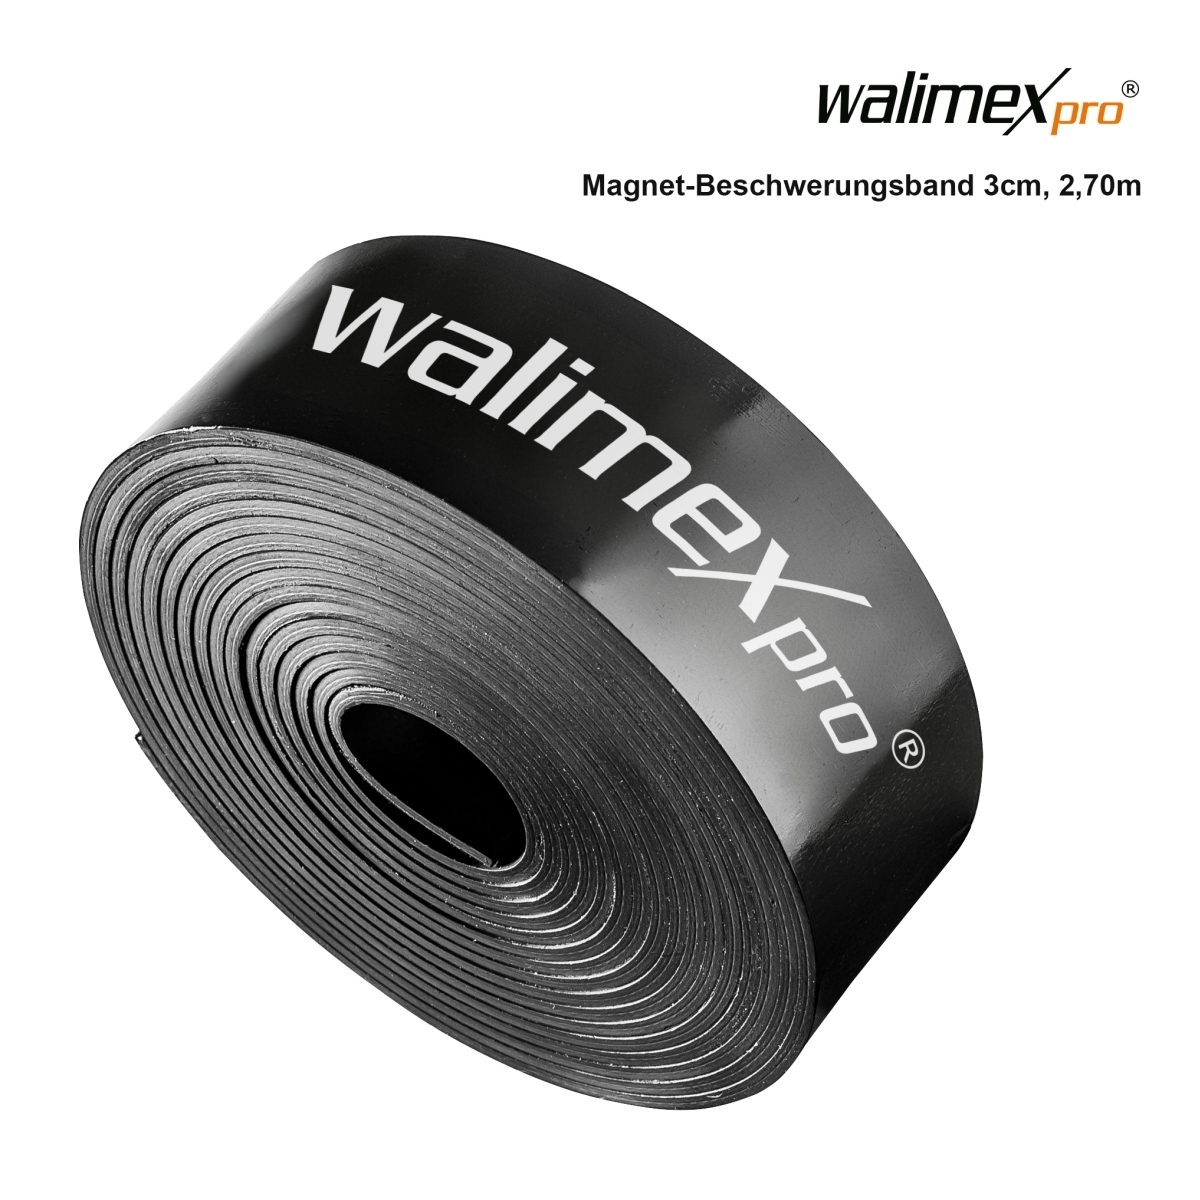 Walimex pro magnetic weighting tape 3cm, 2,7m